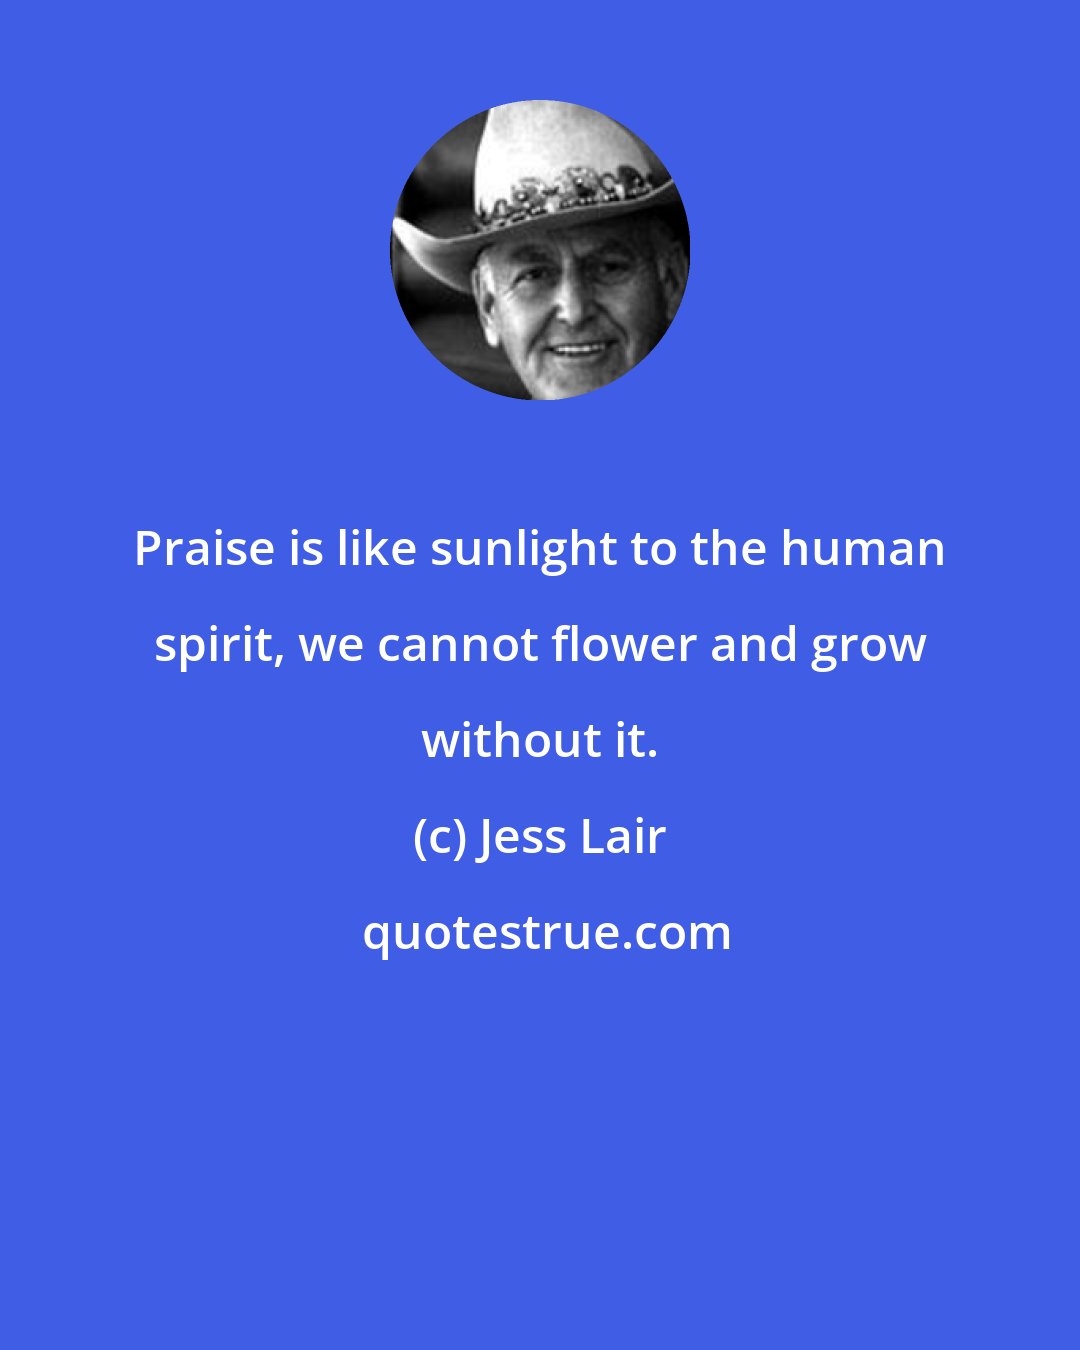 Jess Lair: Praise is like sunlight to the human spirit, we cannot flower and grow without it.